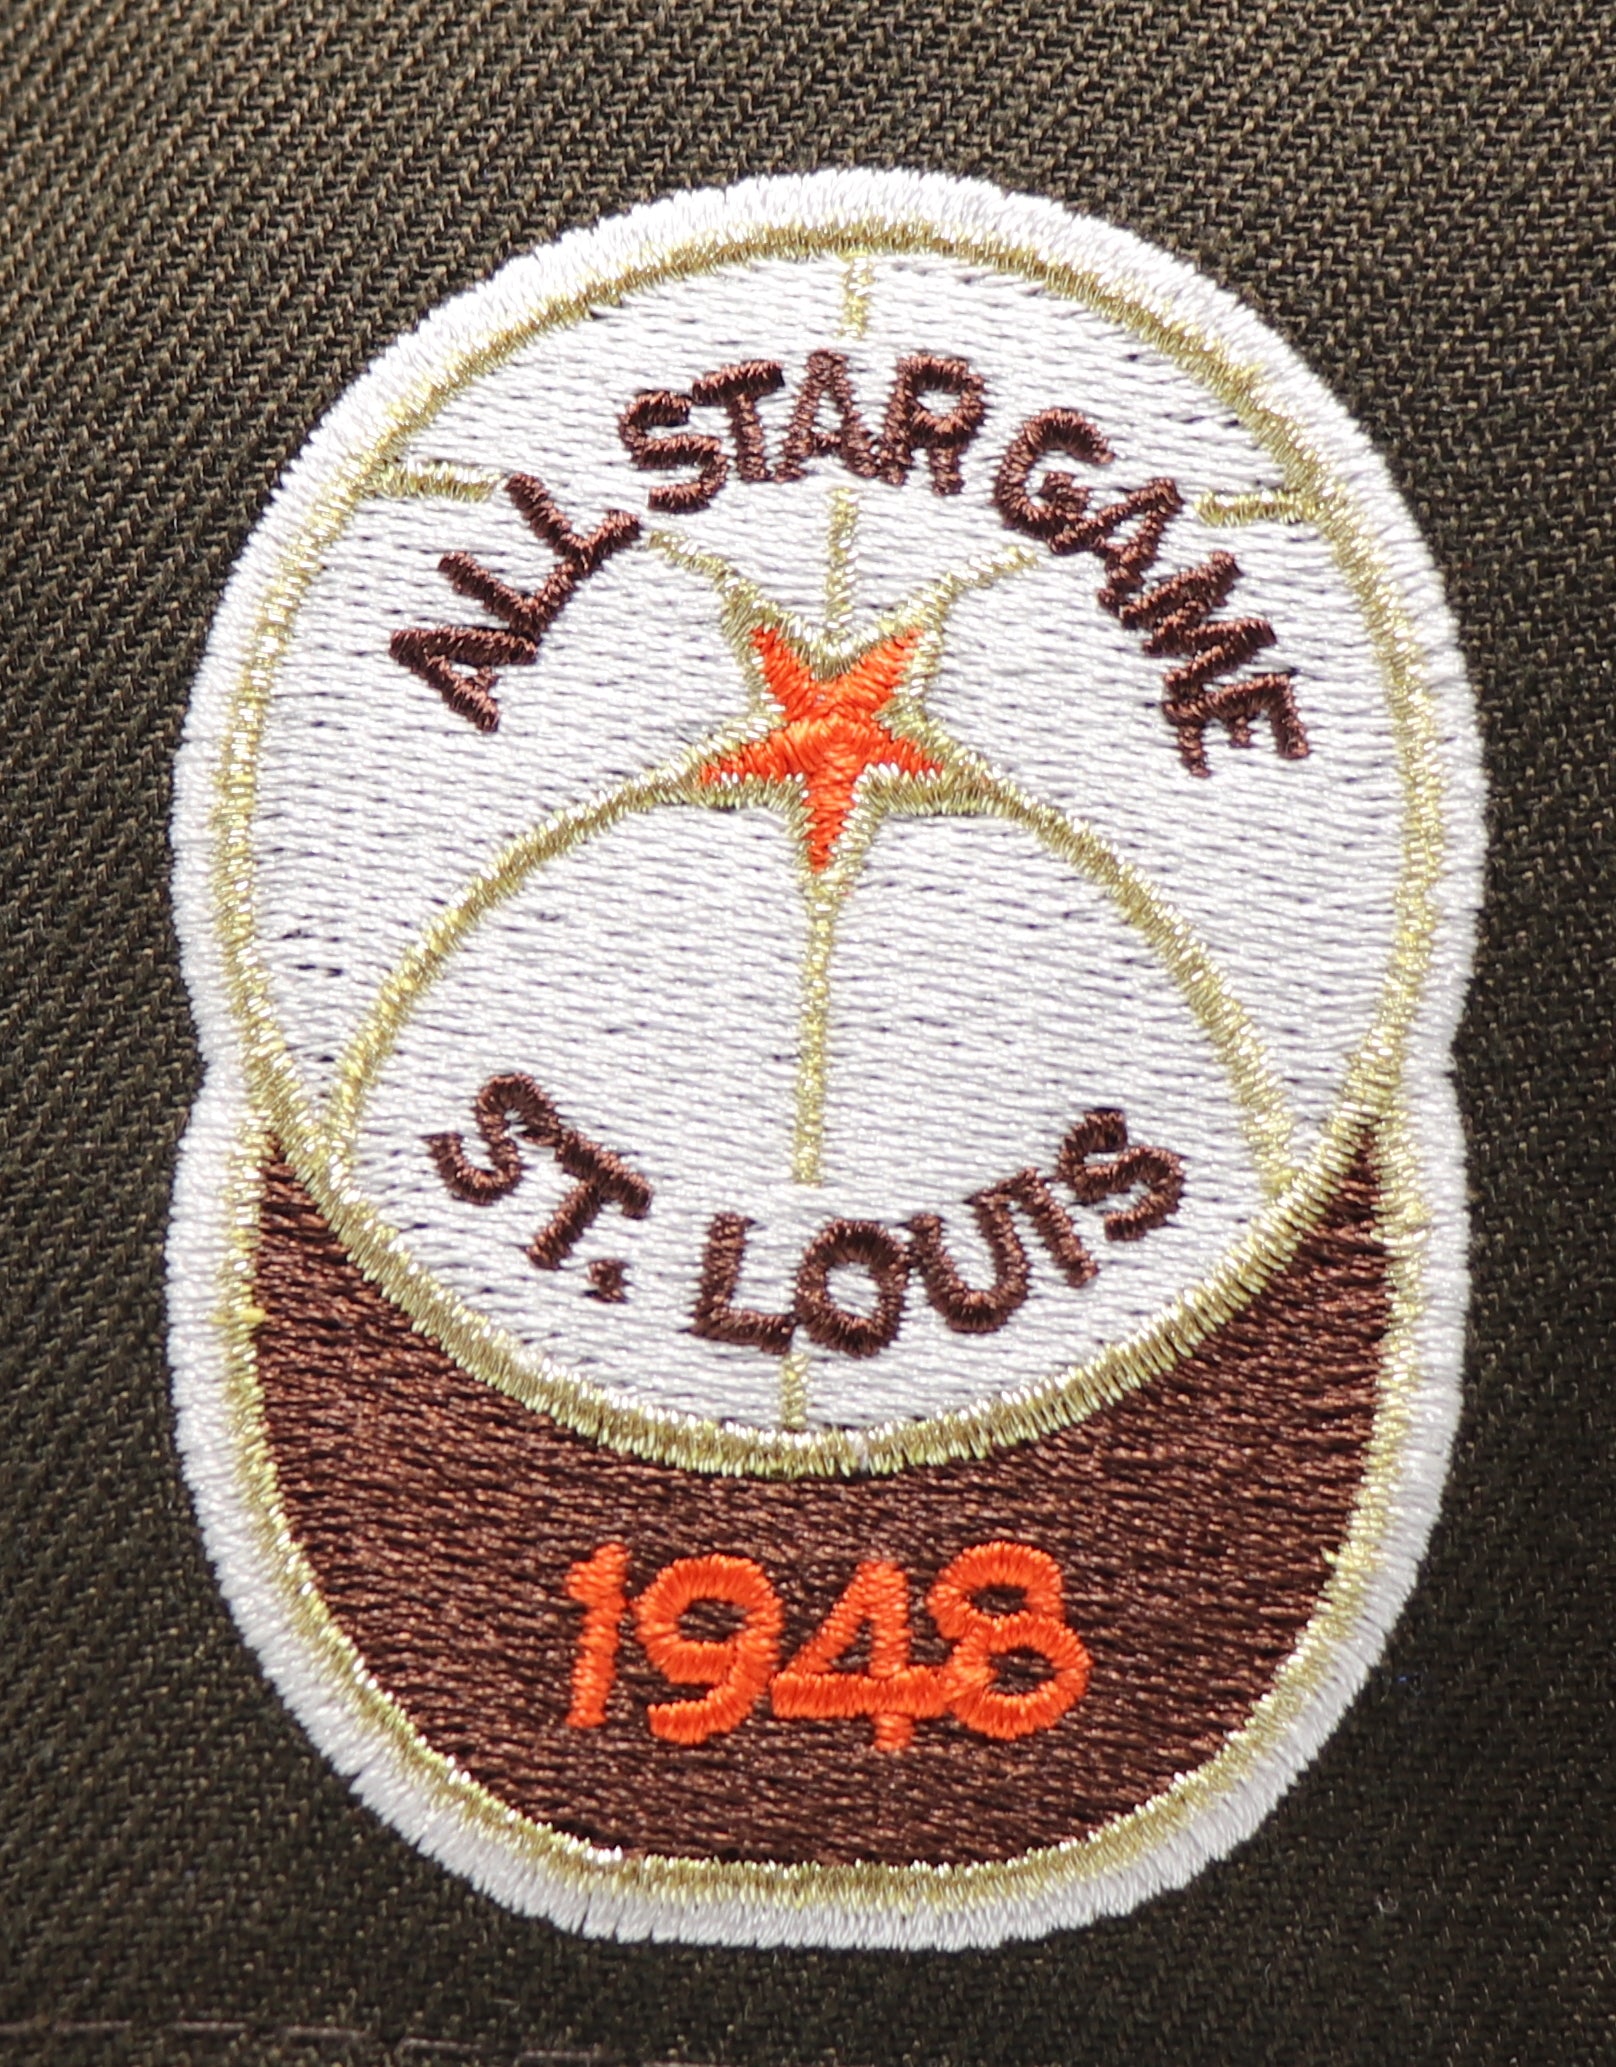 ST. LOUIS BROWNS (1948 ALLSTARGAME) NEW ERA 59FIFTY FITTED (OFF-WHITE UNDER VISOR)